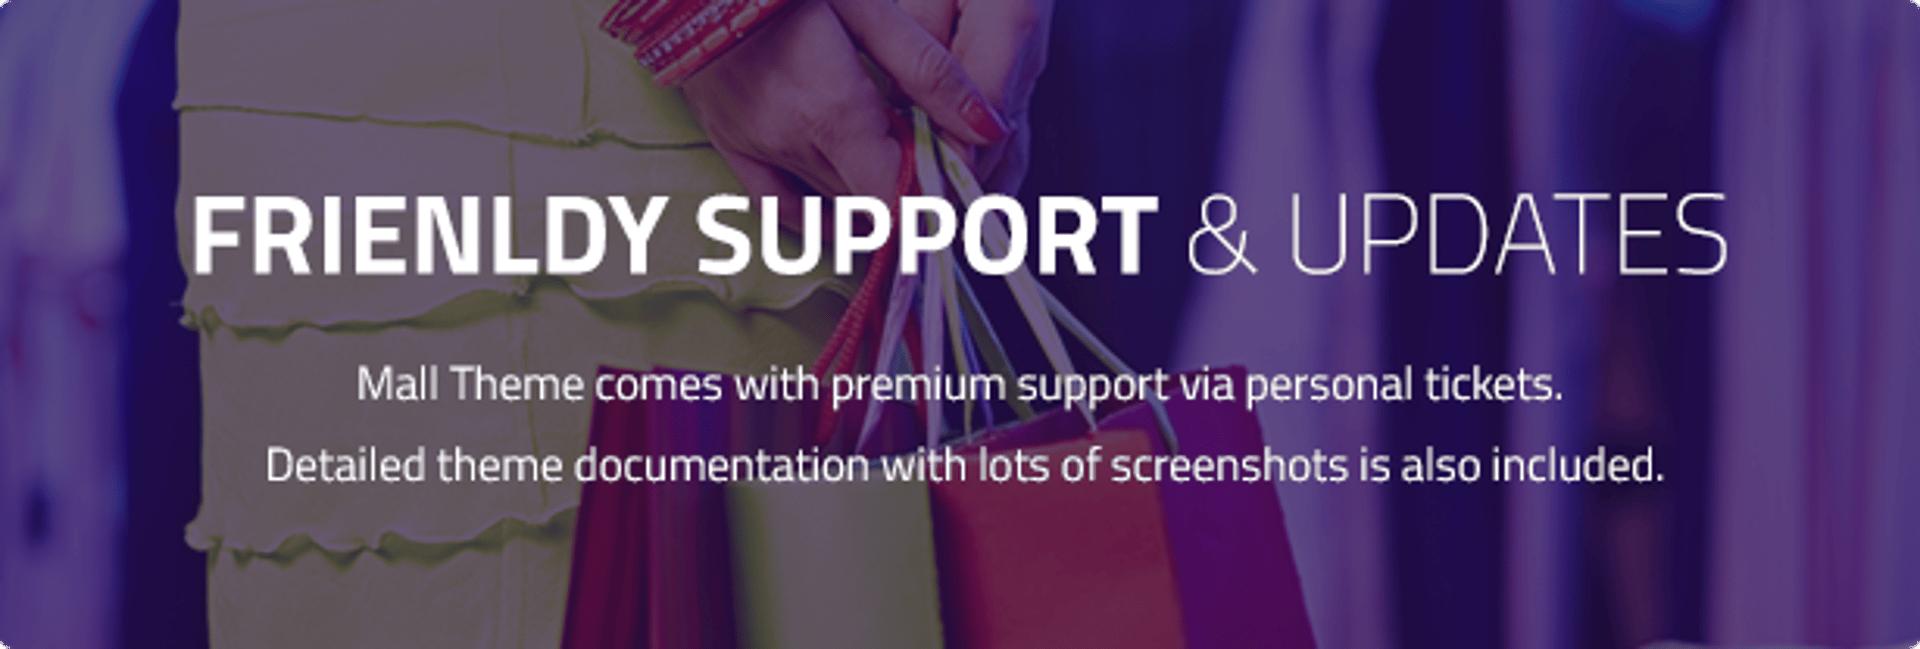 Shopping Mall - Entertainment Center and Business WordPress Theme - Friendly Support & Updates | cmsmasters studio